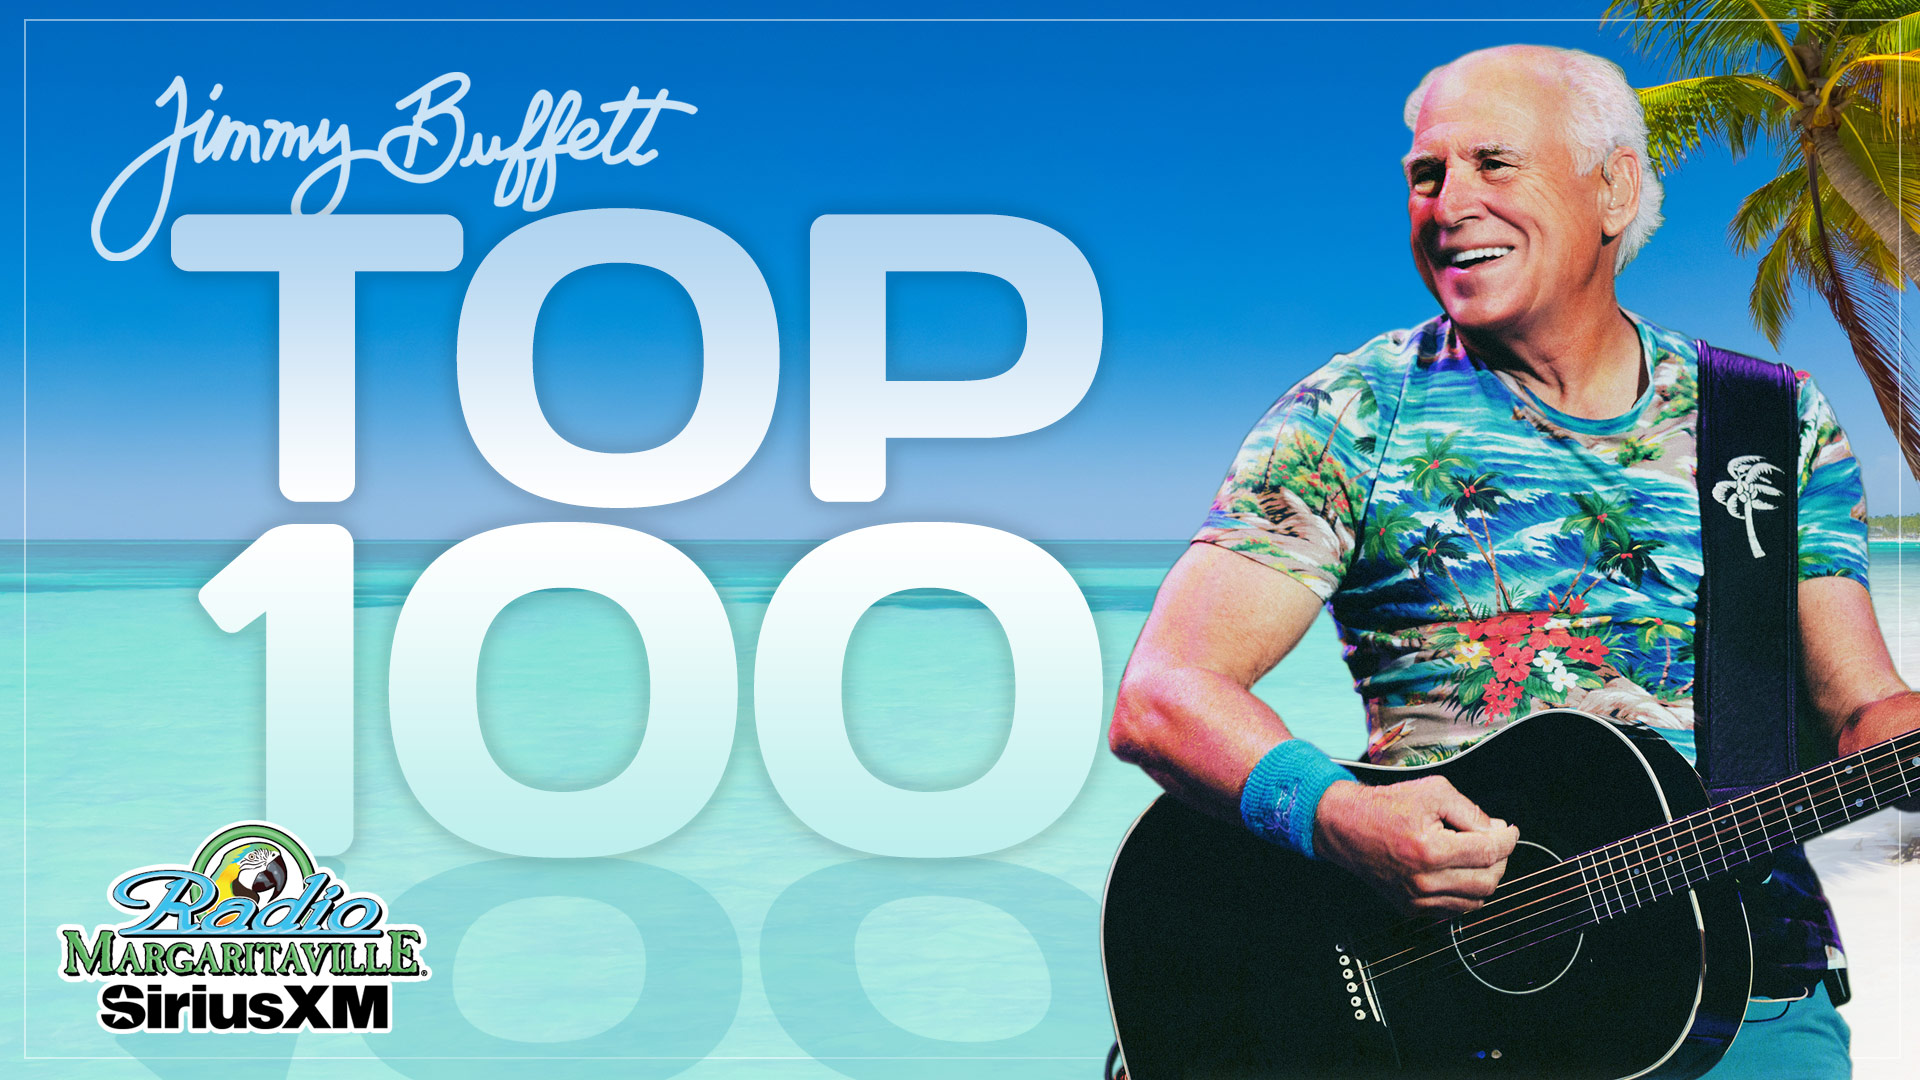 Vote Now for Your Favorite Jimmy Buffett Songs